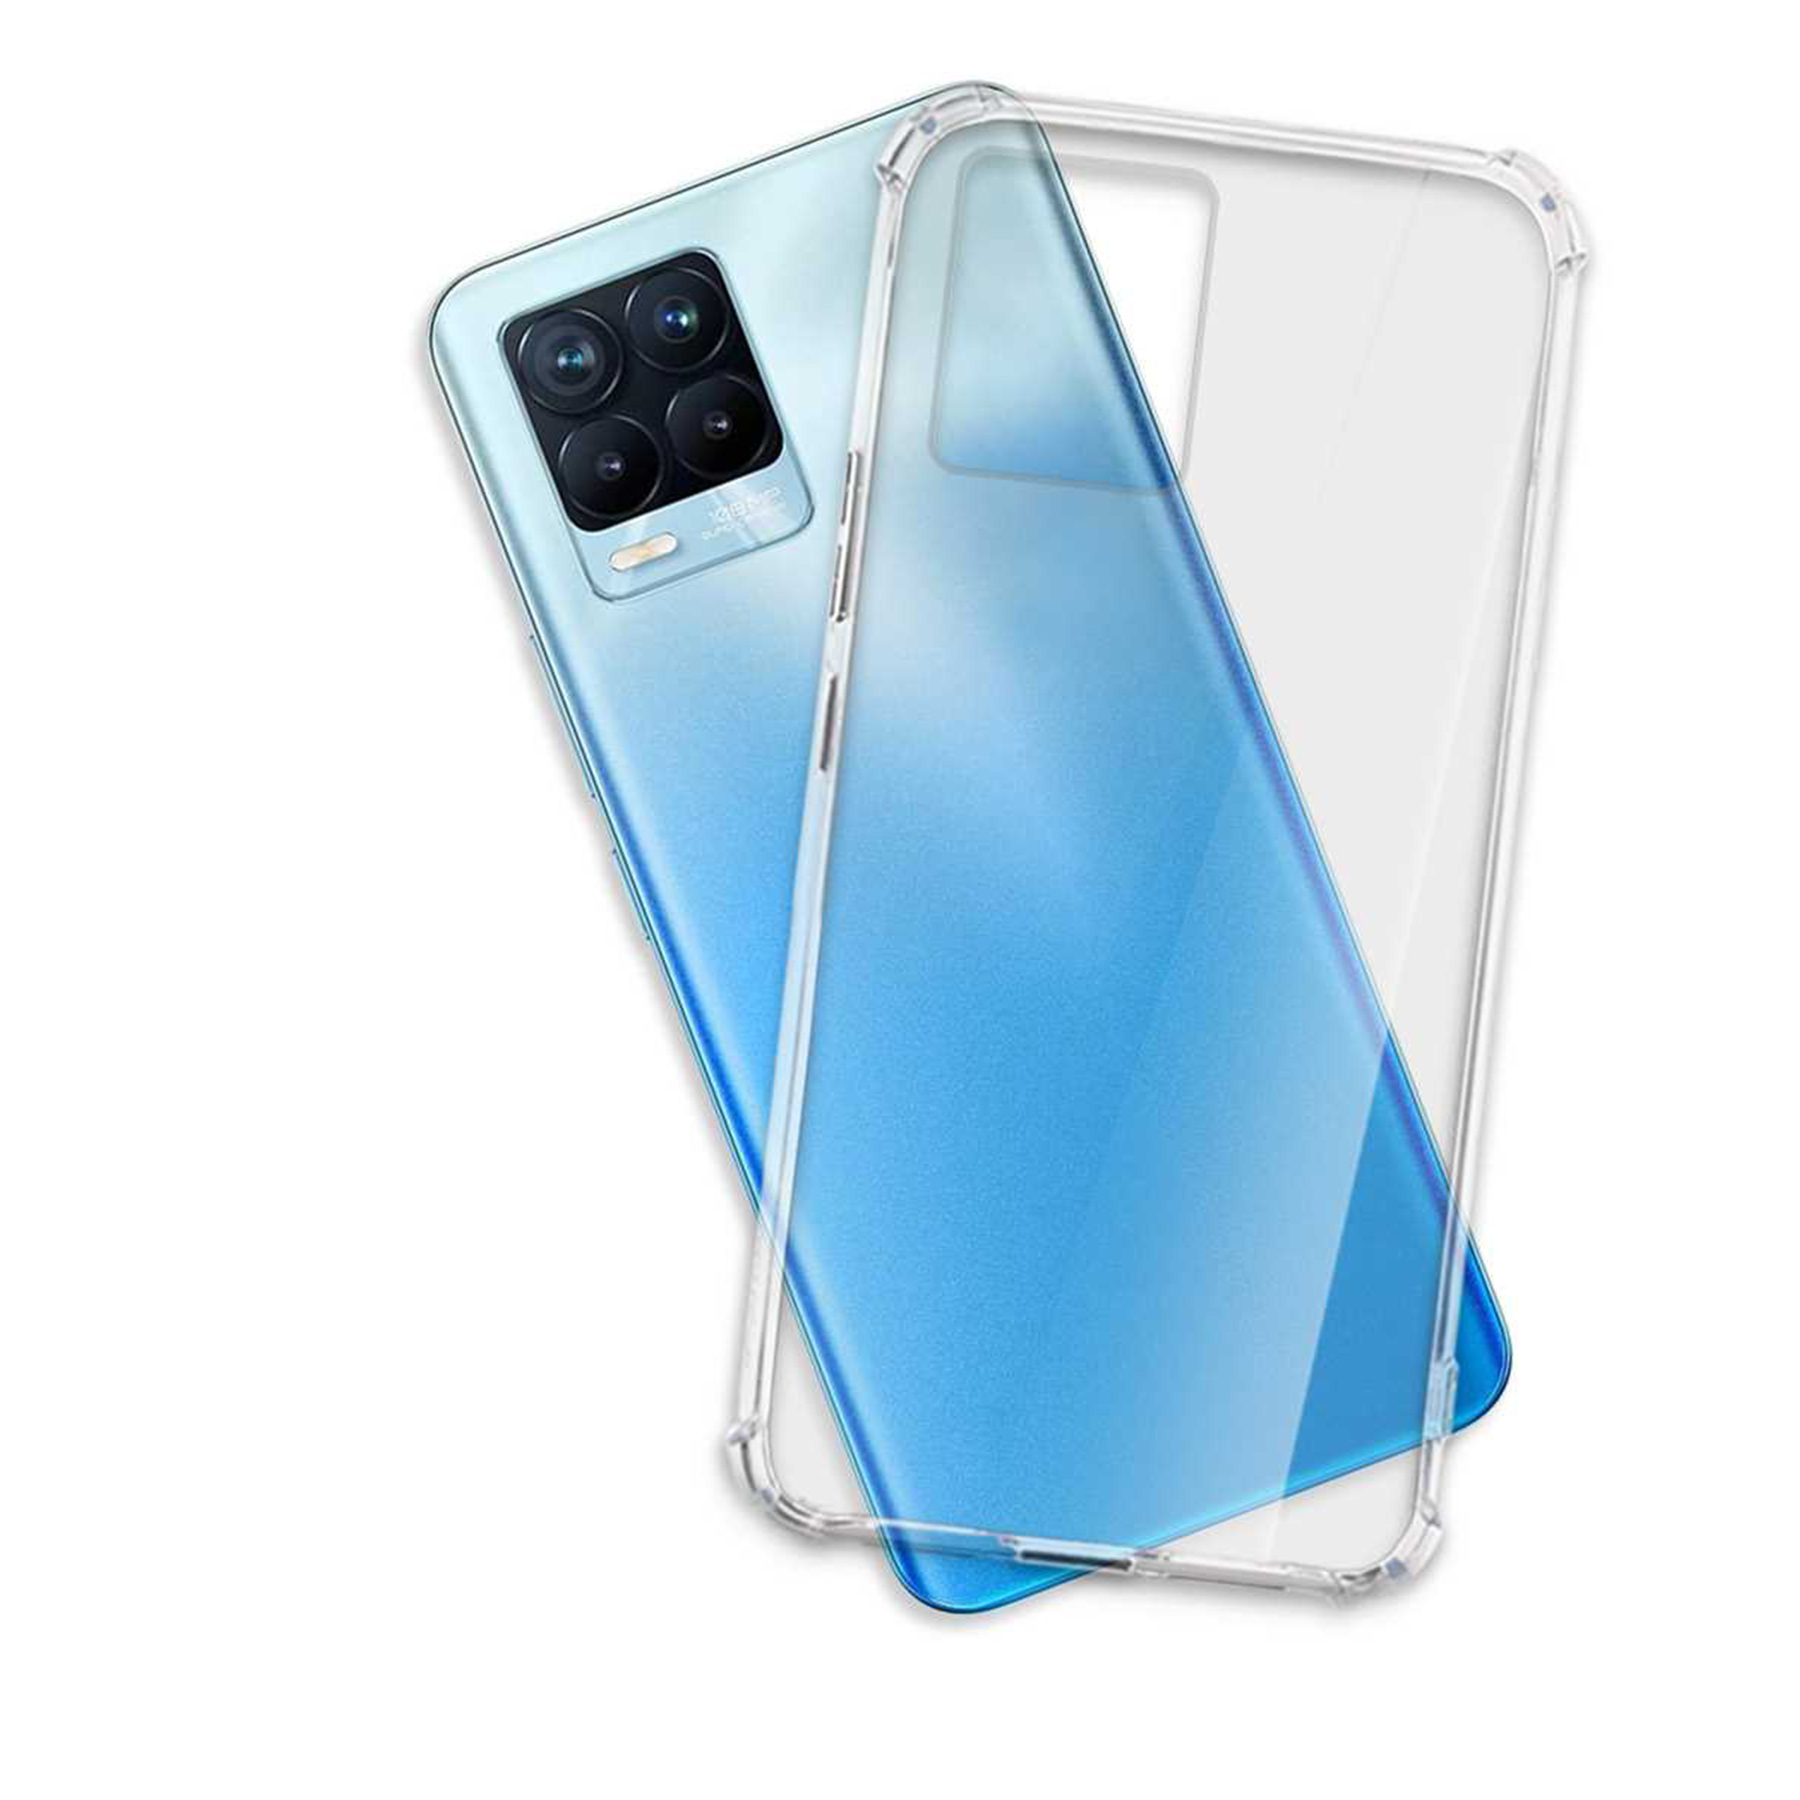 8, Transparent 8 Case, Armor Pro, Backcover, ENERGY Clear MTB MORE Realme,